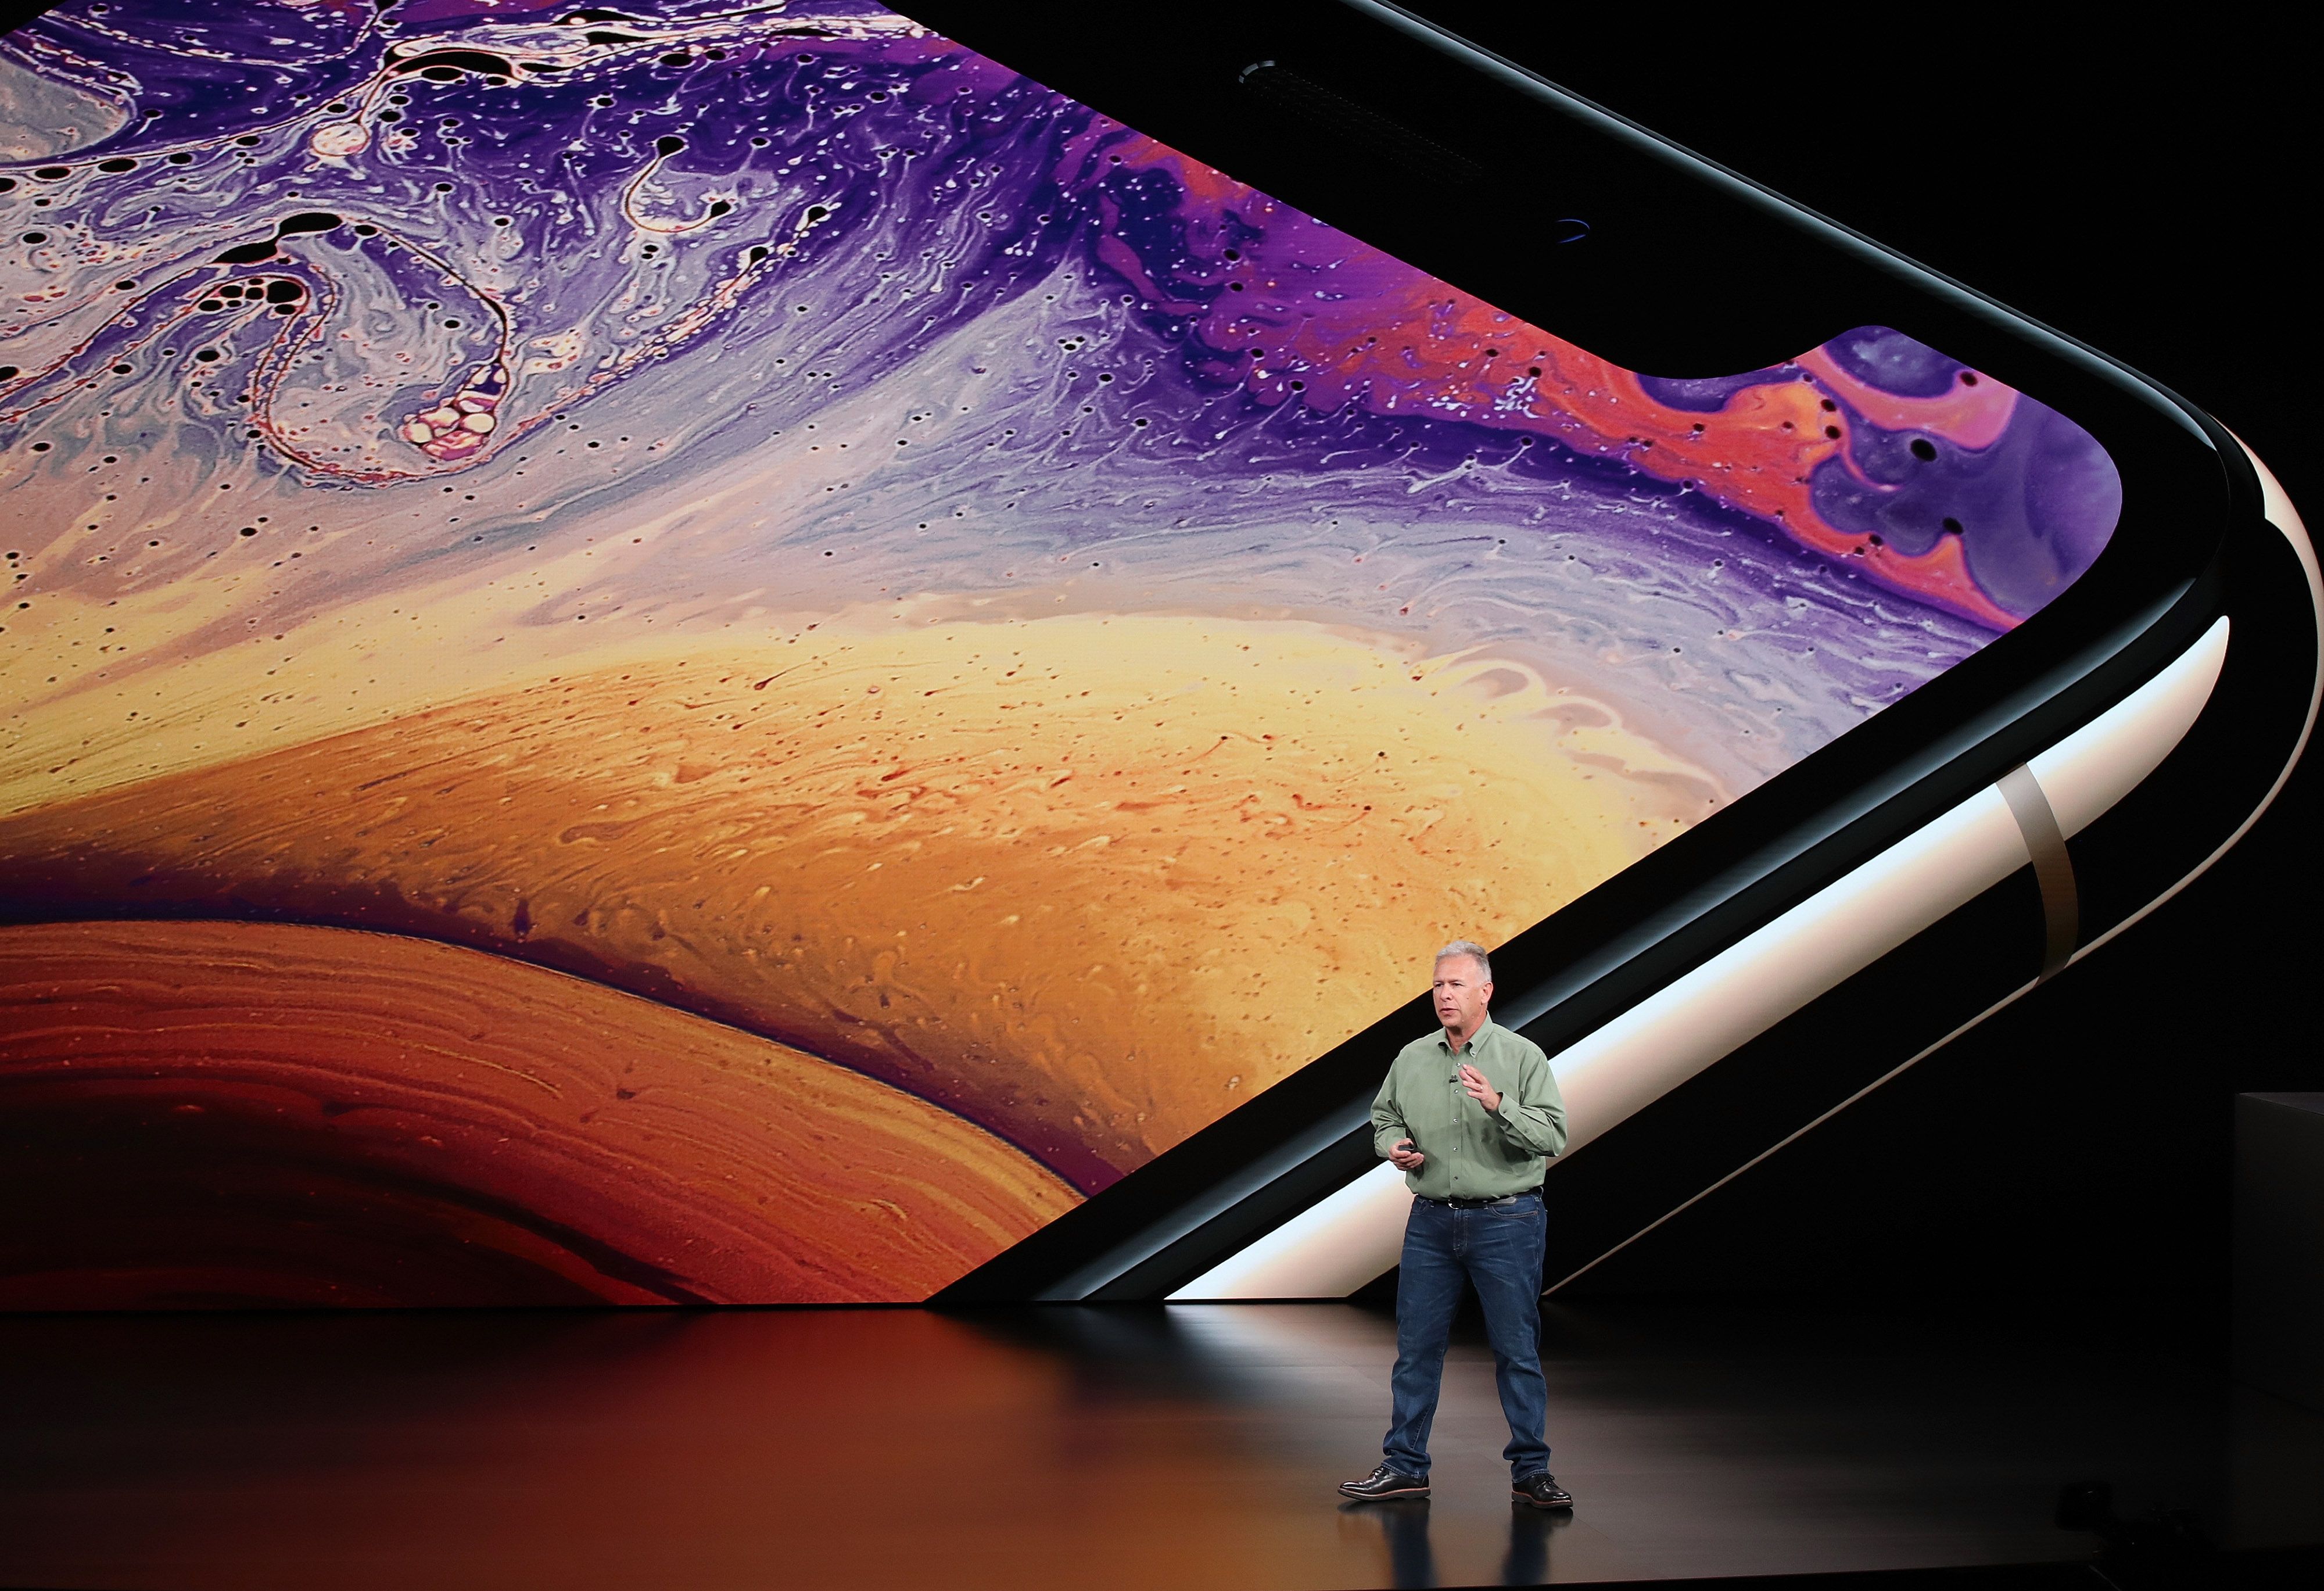 Iphone Xs Price Specs Colors And Details Revealed At Apple 18 Launch Event